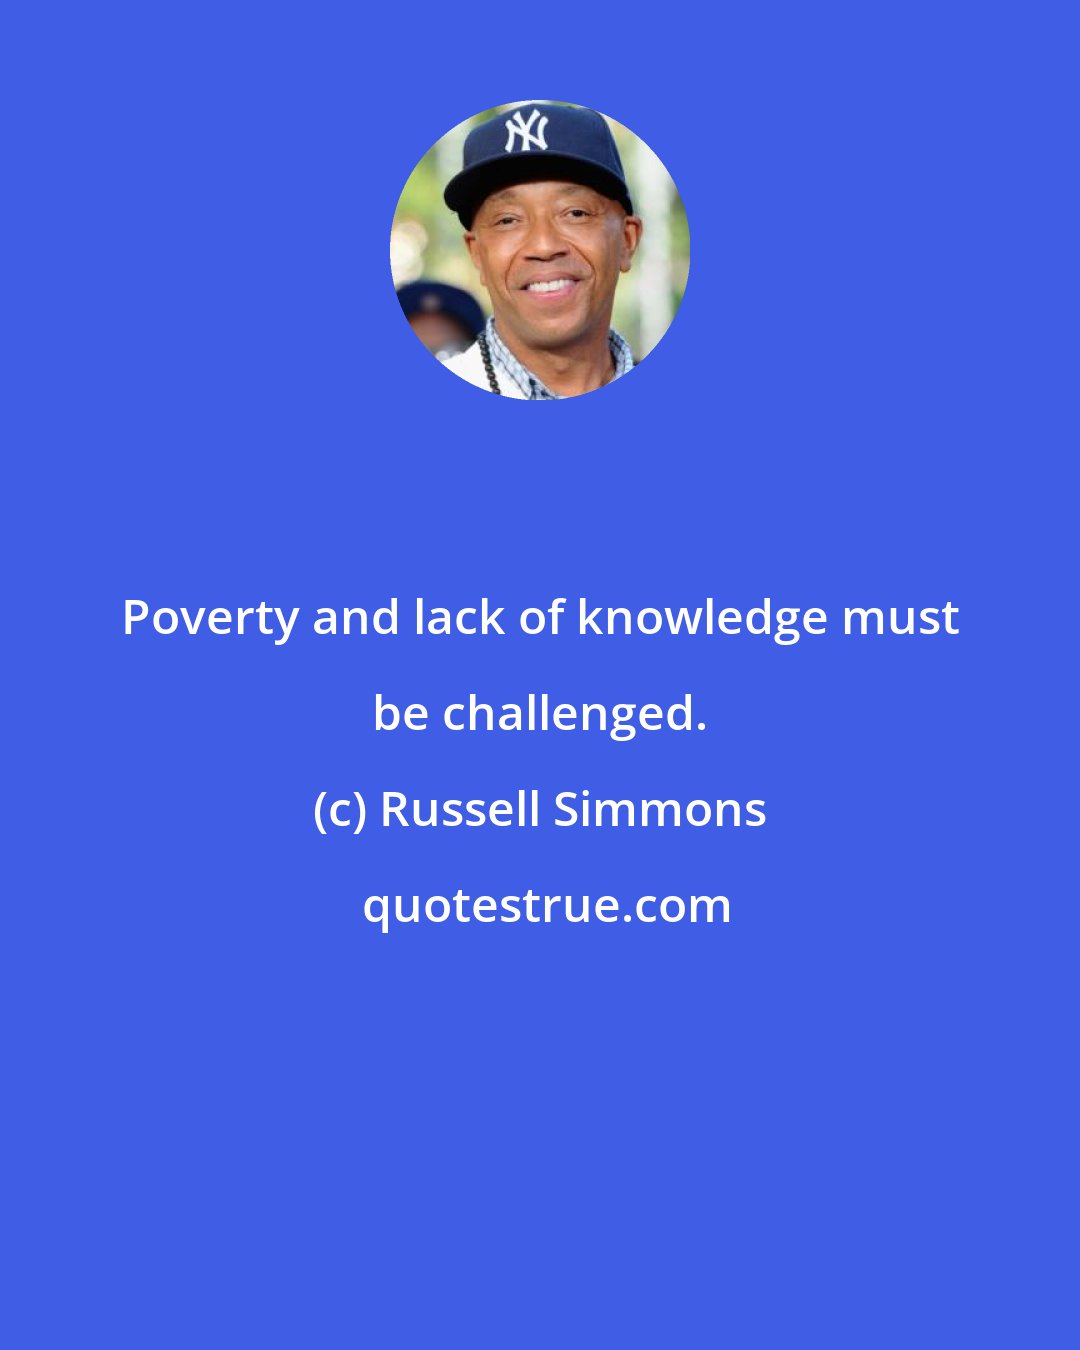 Russell Simmons: Poverty and lack of knowledge must be challenged.